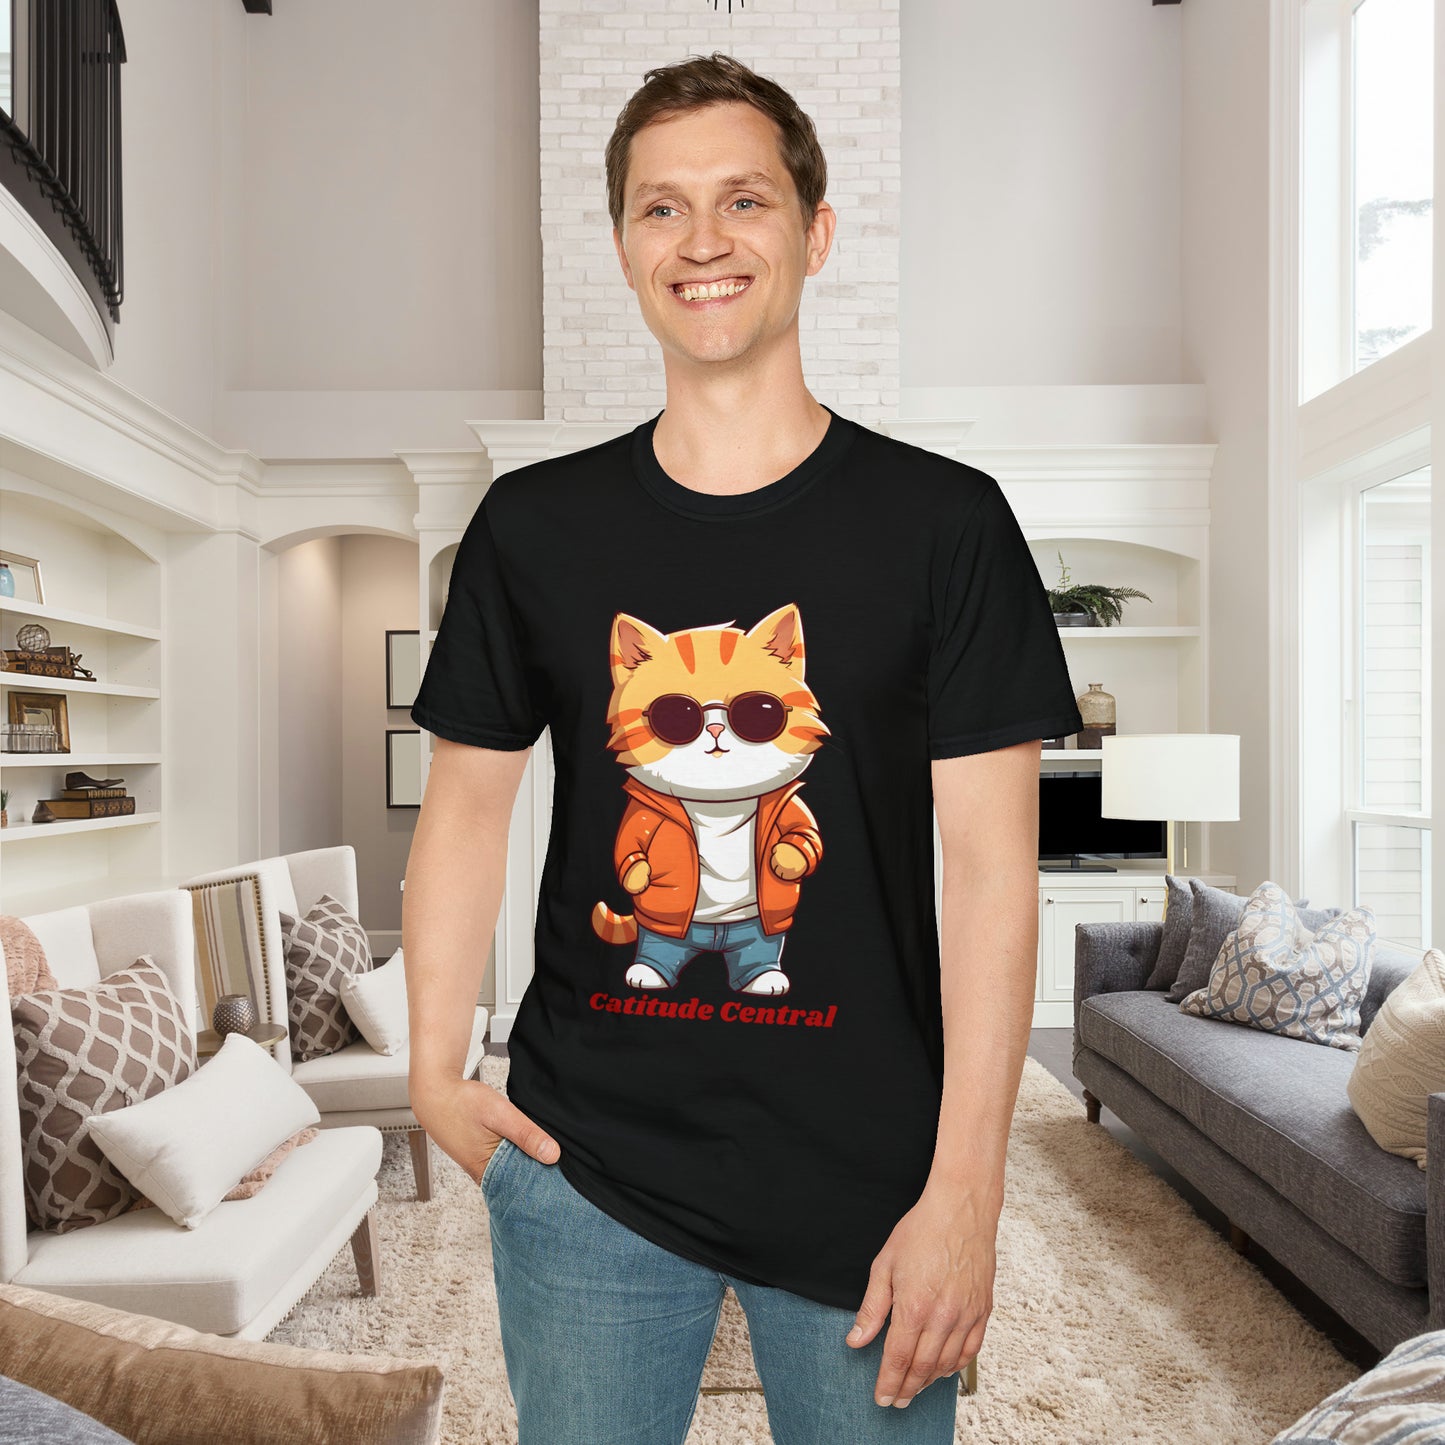 A cool cat with  “Catitude Central” below it on this Unisex Softstyle T-Shirt. Cat lovers get this.